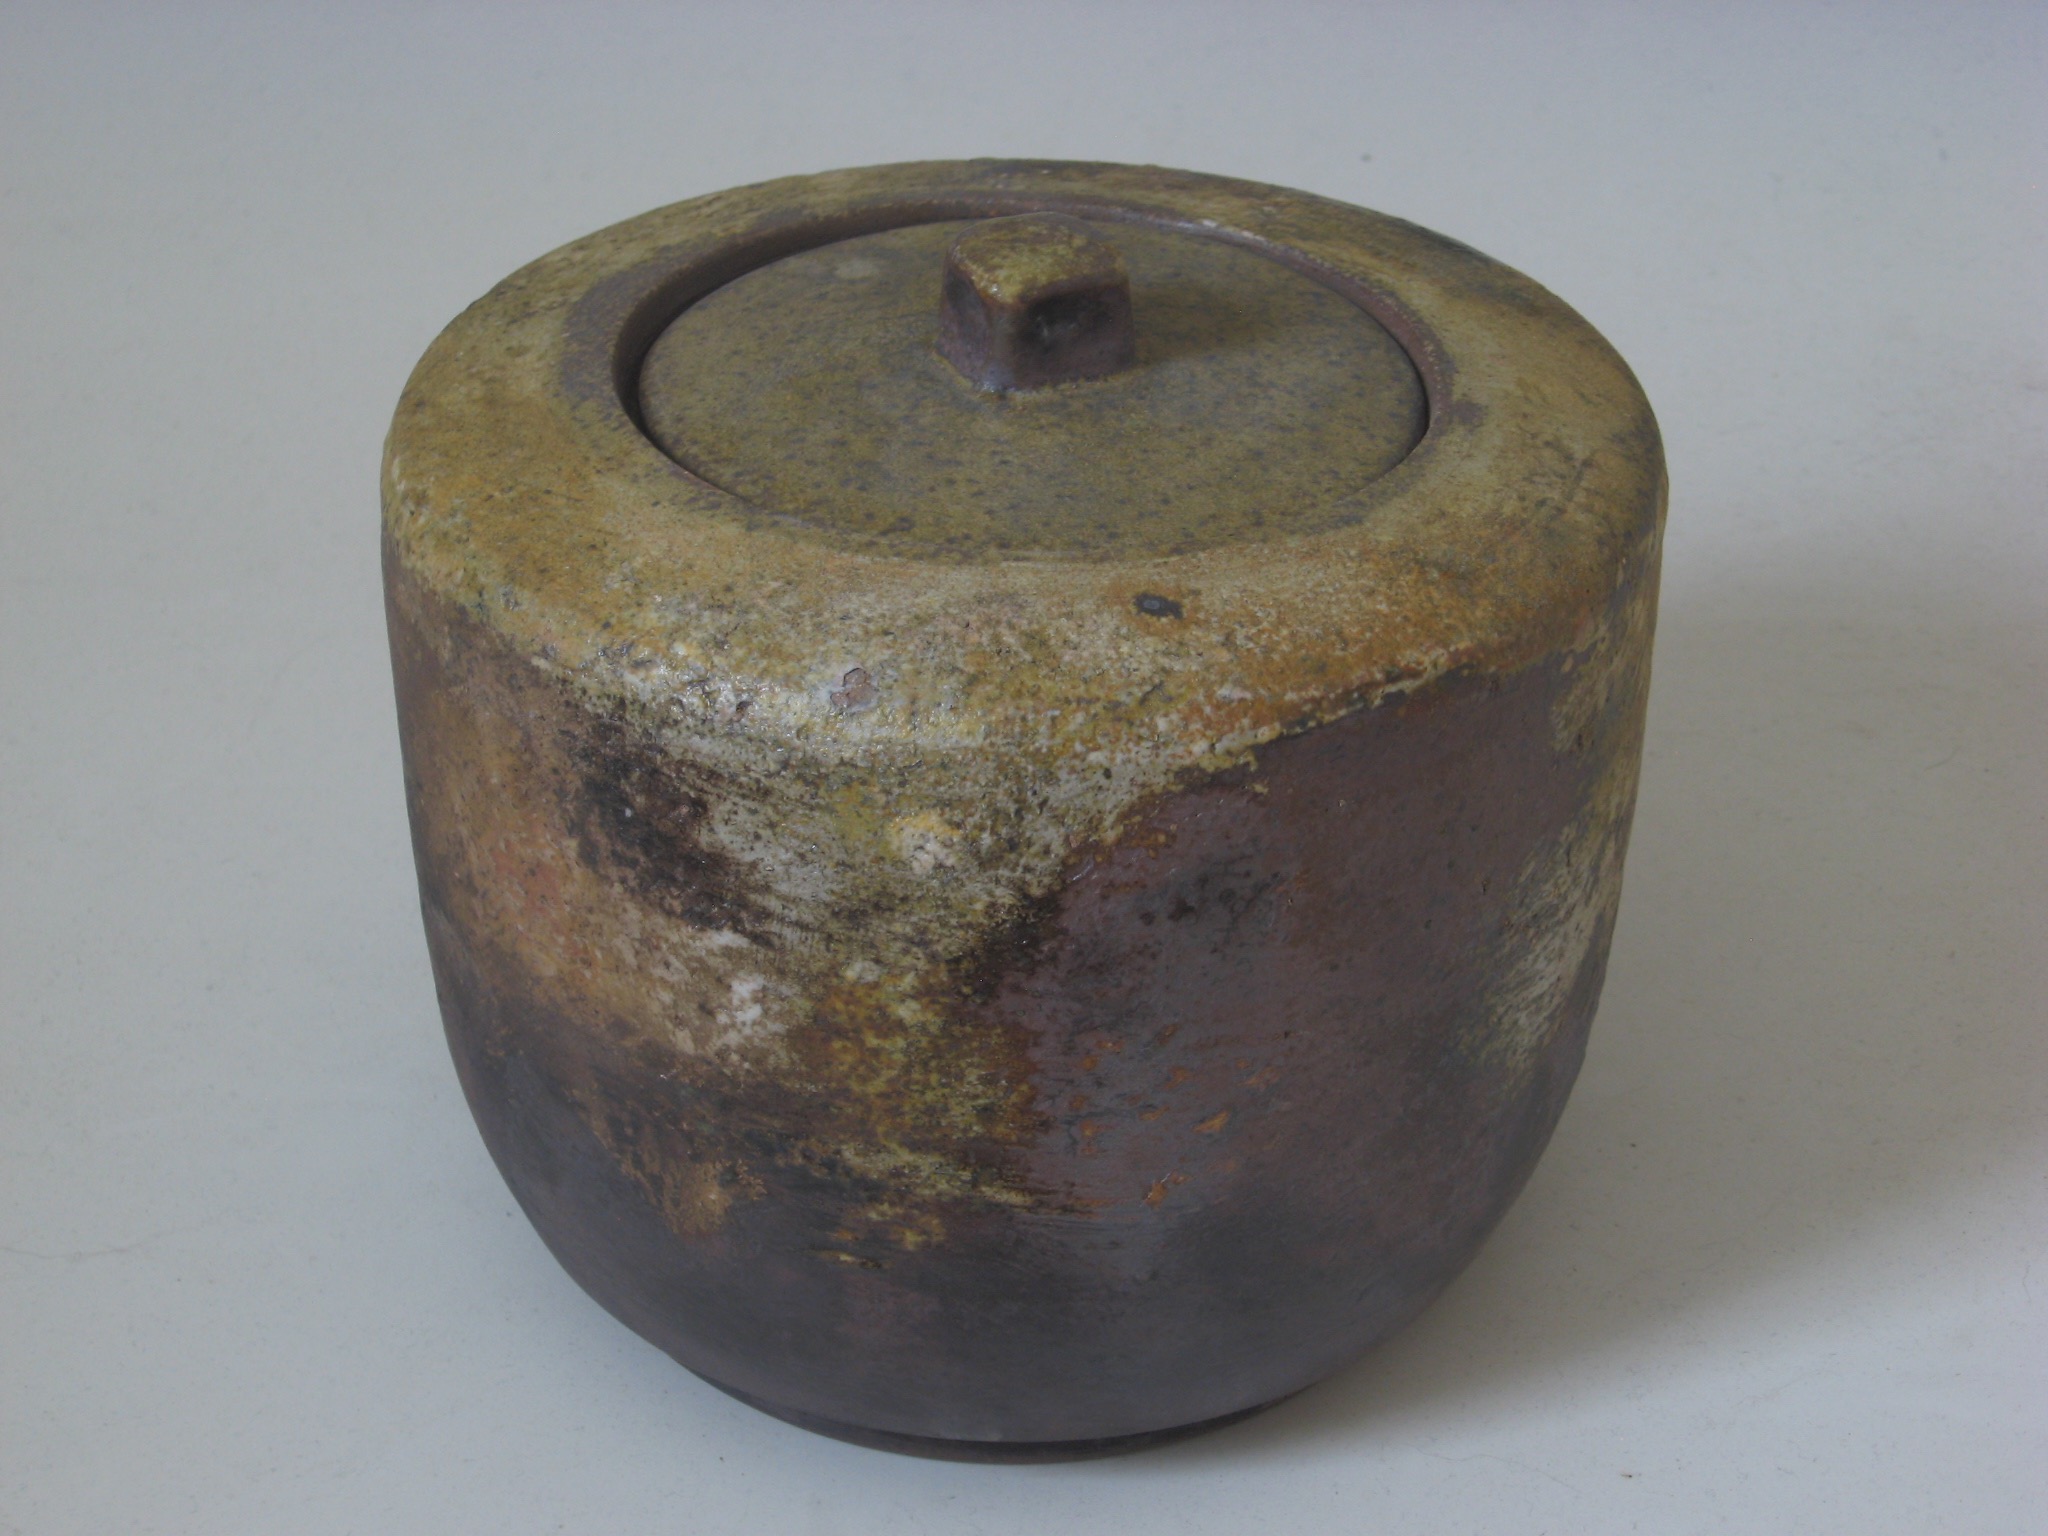 John Ikeda: Longwater Jar with Lid for Tea Ceremony Product Image 1 of 6